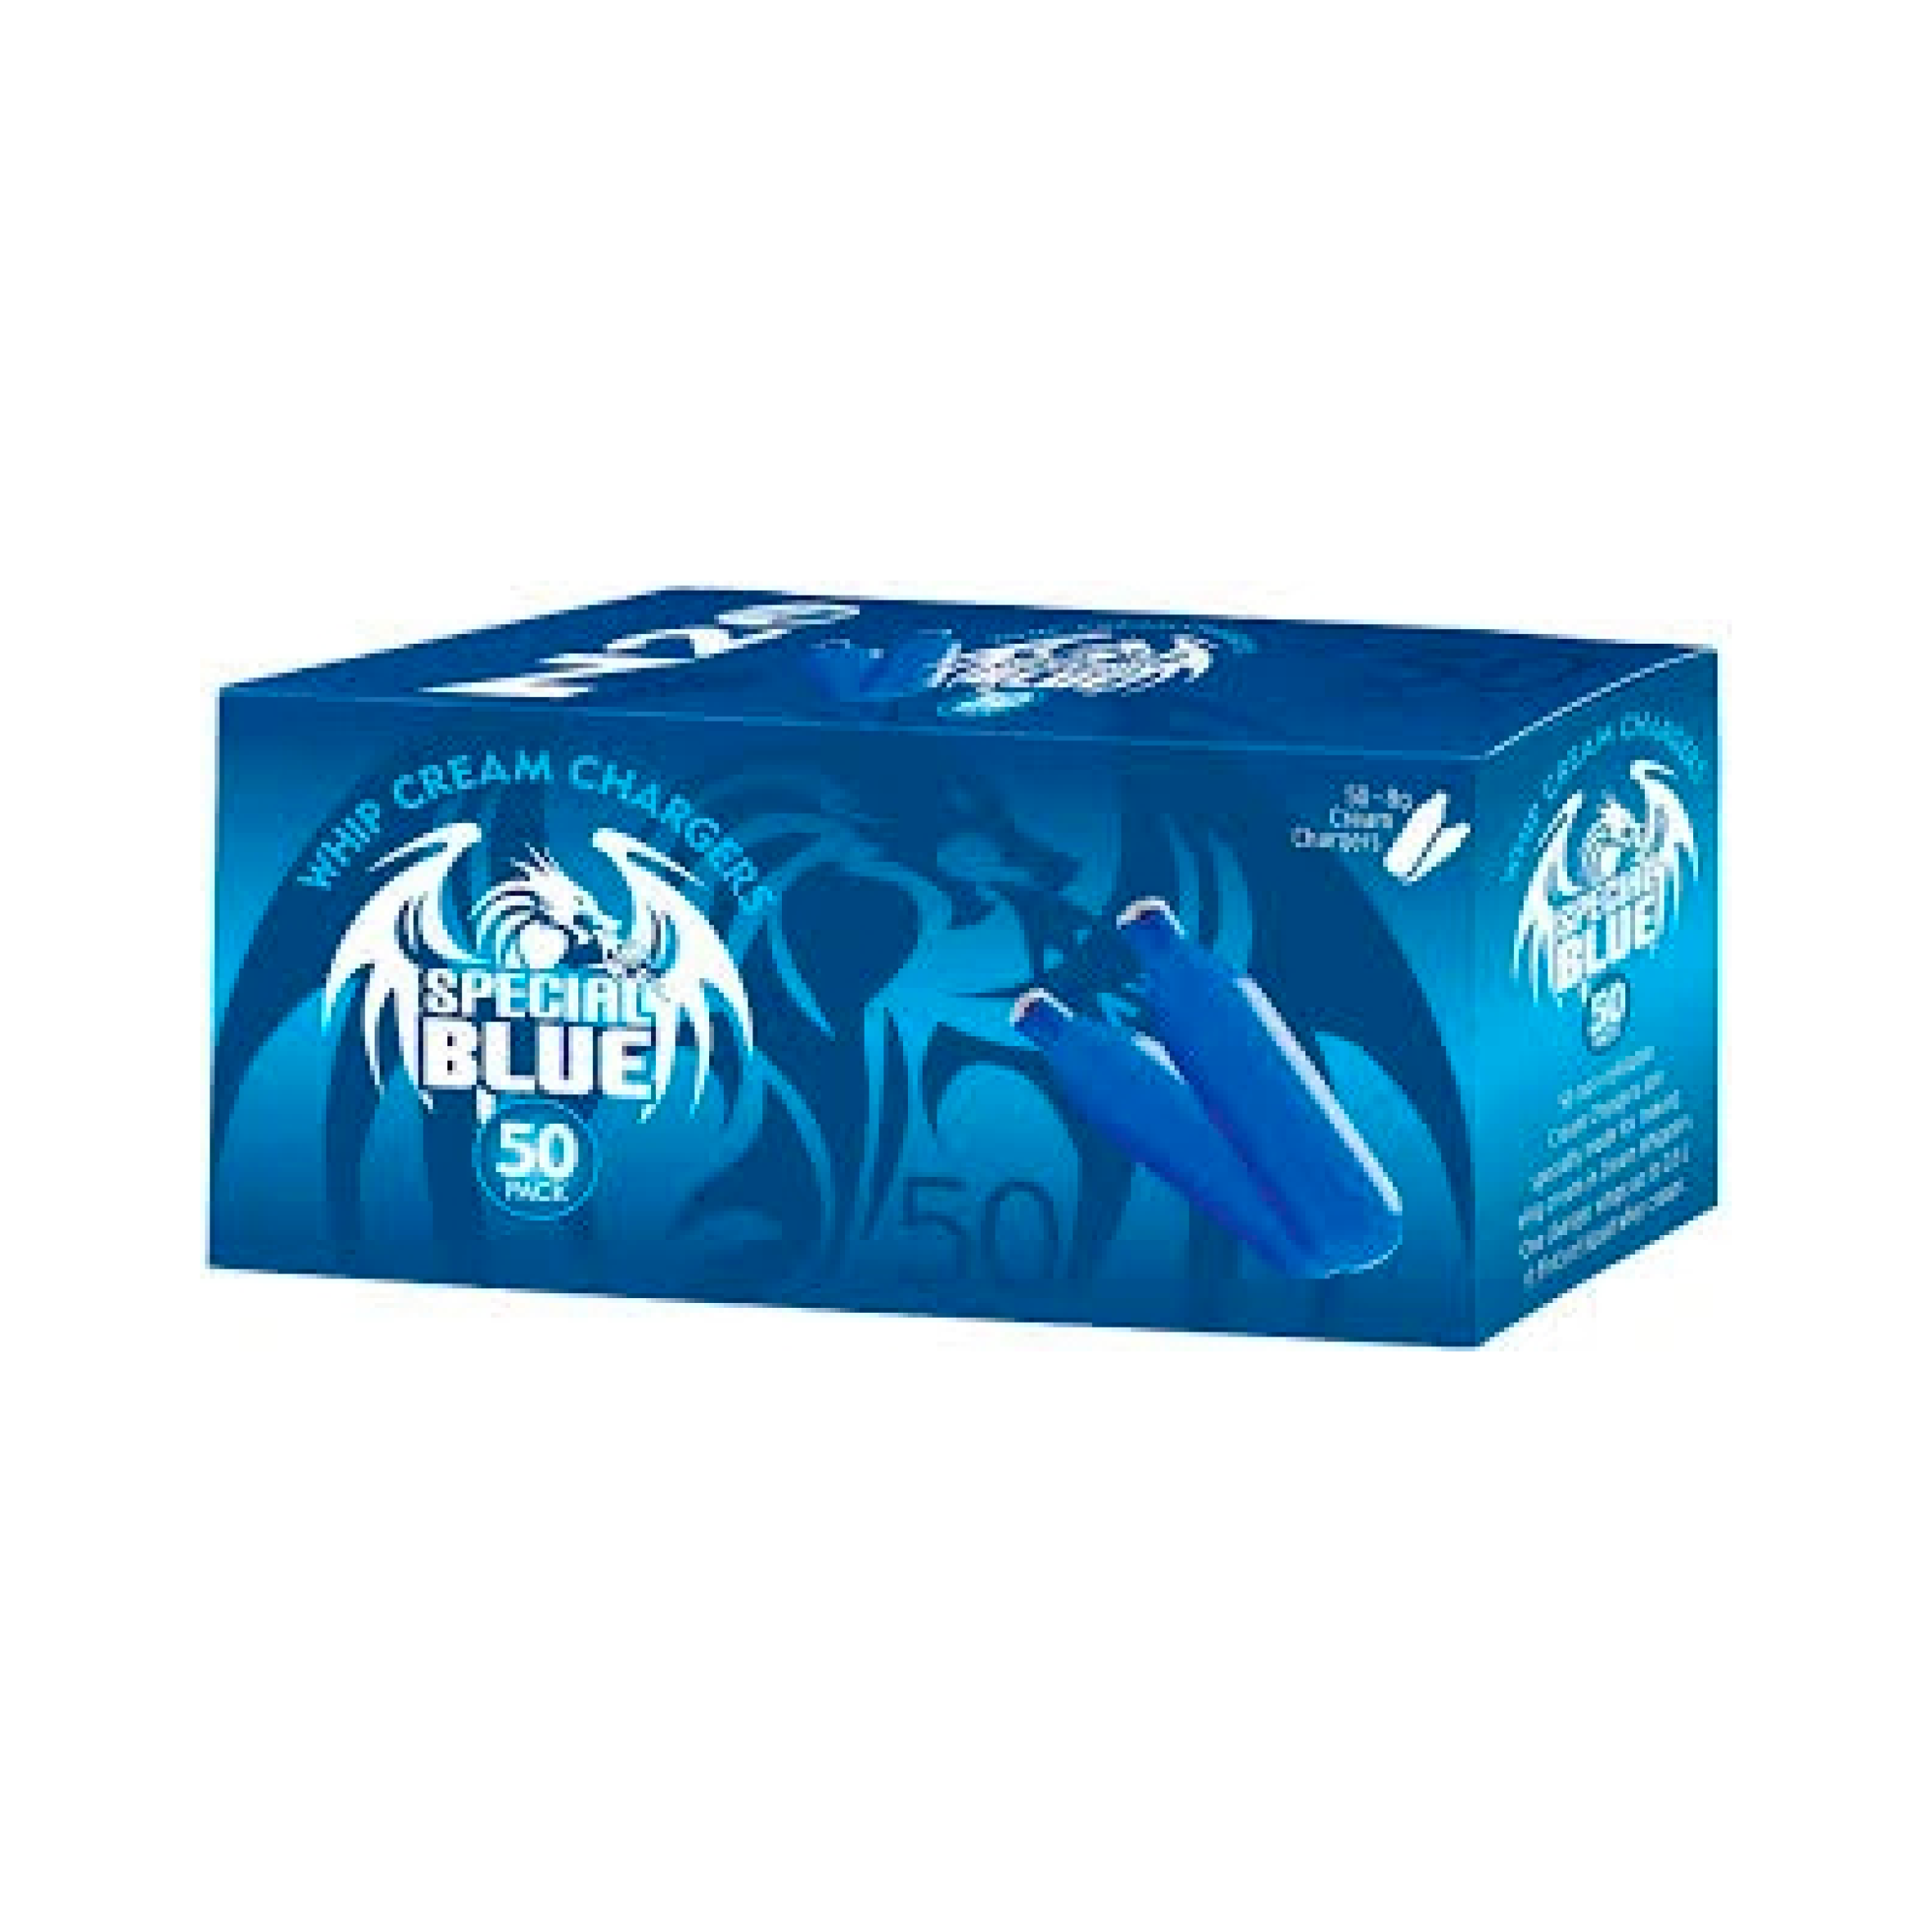 600 Special Blue Cream Chargers - 25 x 24 packs (1 Carton)